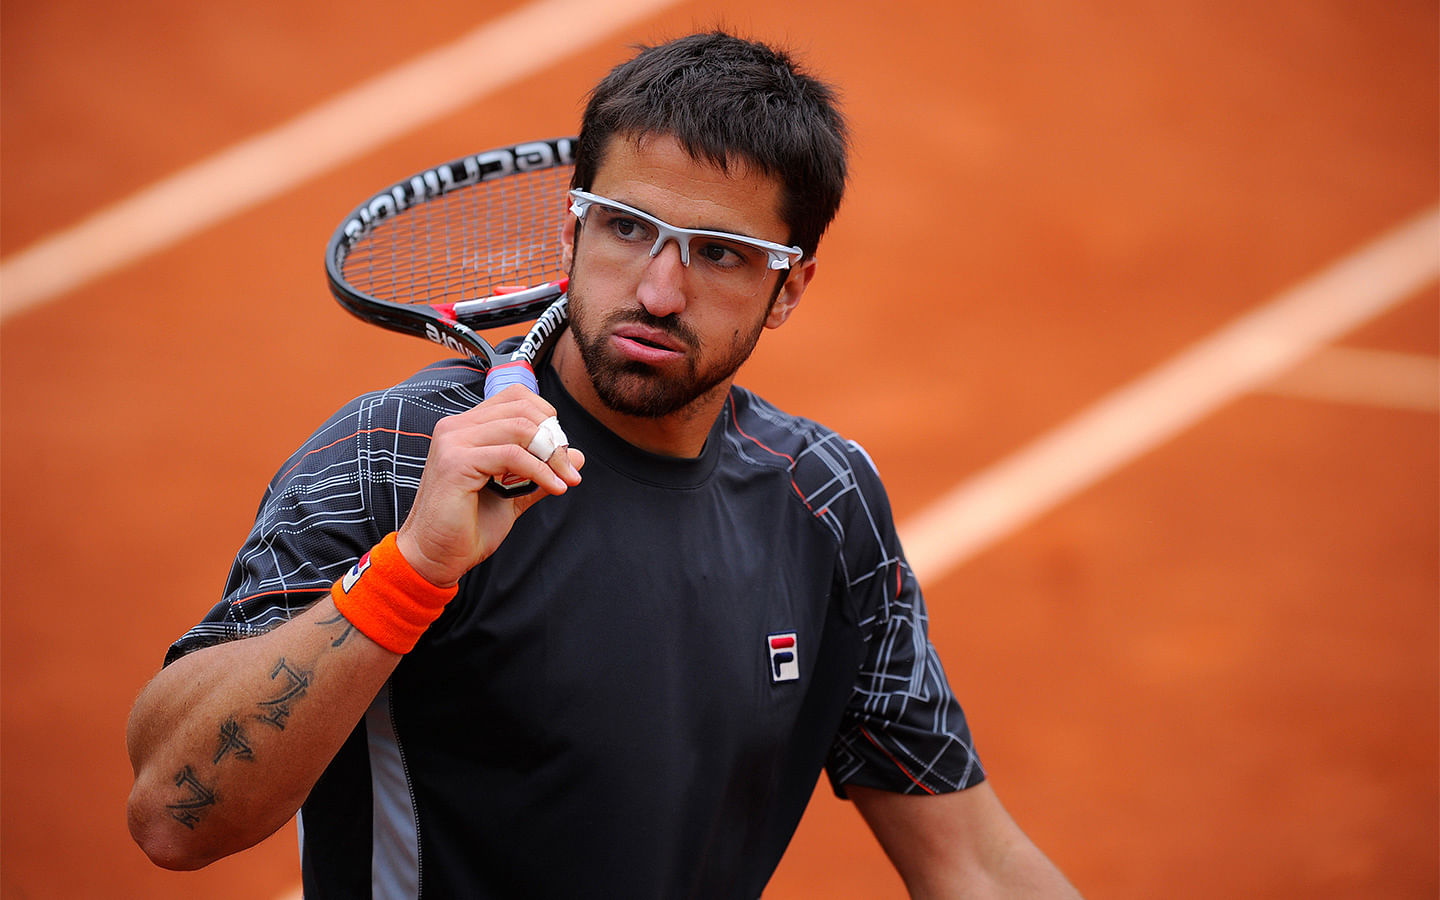 Former Champion Janko Tipsarevic withdraws from Aircel